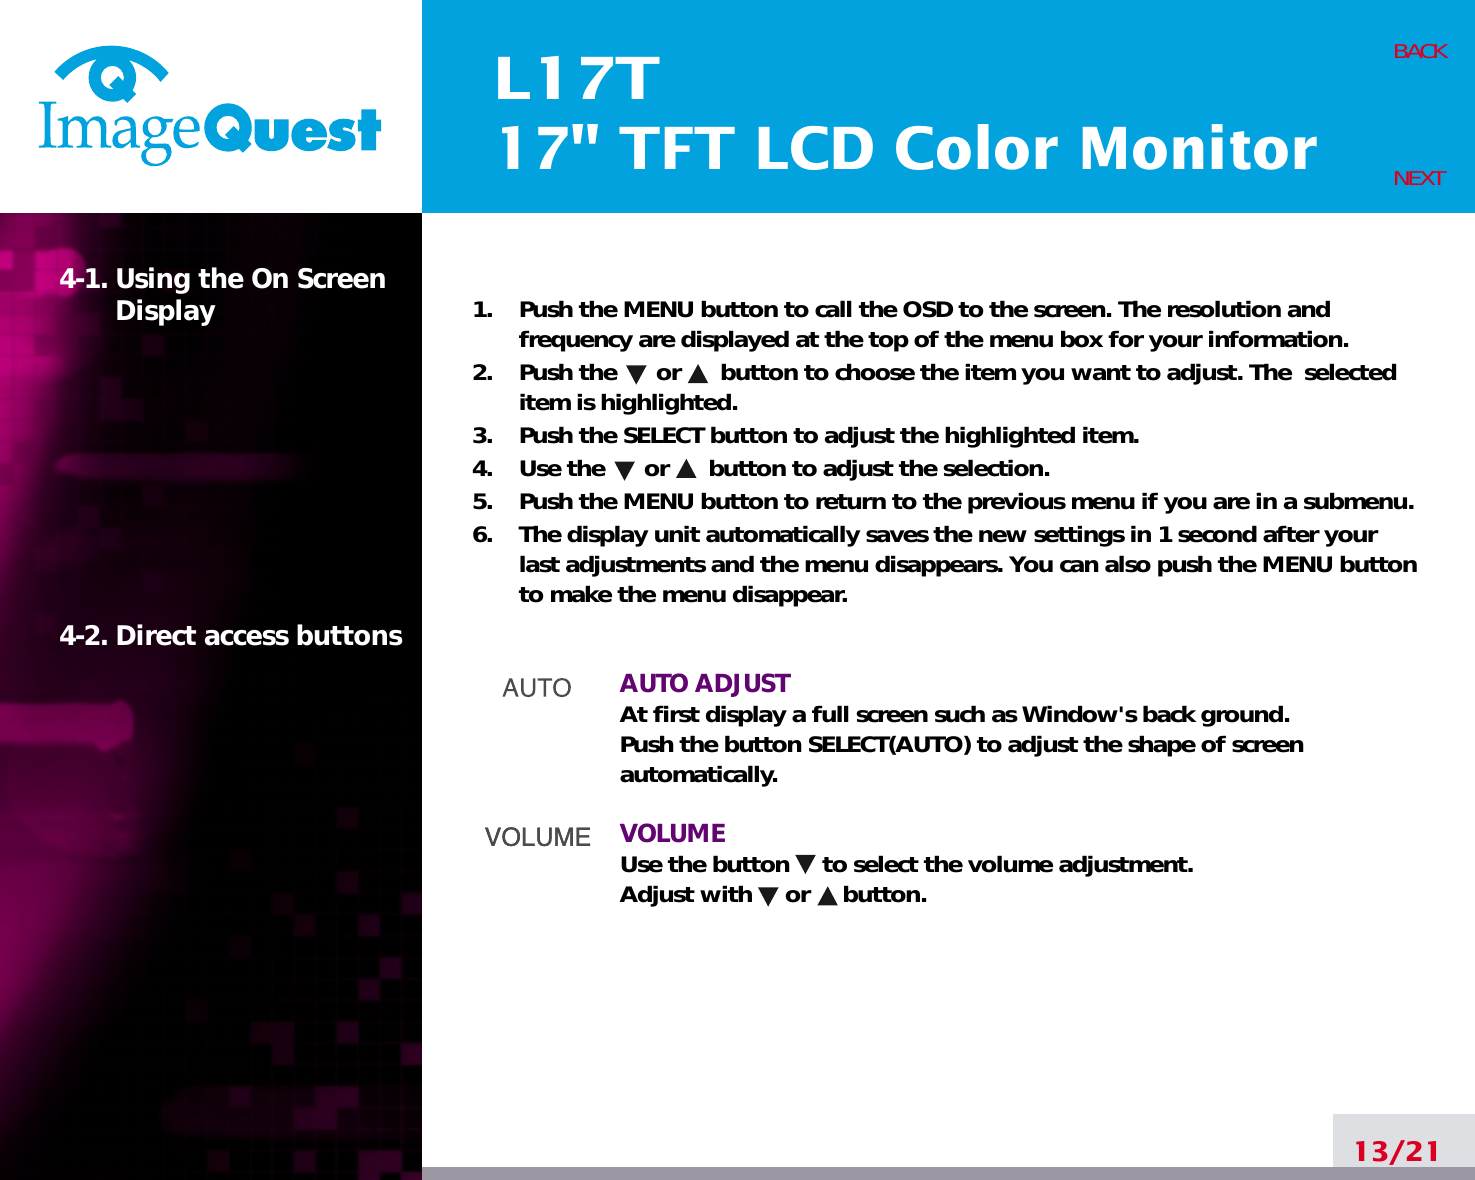 L17T17&quot; TFT LCD Color Monitor13/21BACKNEXT1.    Push the MENU button to call the OSD to the screen. The resolution andfrequency are displayed at the top of the menu box for your information.2.    Push the      or      button to choose the item you want to adjust. The  selecteditem is highlighted.3.    Push the SELECT button to adjust the highlighted item. 4.    Use the      or      button to adjust the selection.5.    Push the MENU button to return to the previous menu if you are in a submenu.6.    The display unit automatically saves the new settings in 1 second after yourlast adjustments and the menu disappears. You can also push the MENU buttonto make the menu disappear.AUTO ADJUSTAt first display a full screen such as Window&apos;s back ground.Push the button SELECT(AUTO) to adjust the shape of screenautomatically.VOLUMEUse the button     to select the volume adjustment.Adjust with     or     button.4-1. Using the On ScreenDisplay 4-2. Direct access buttons